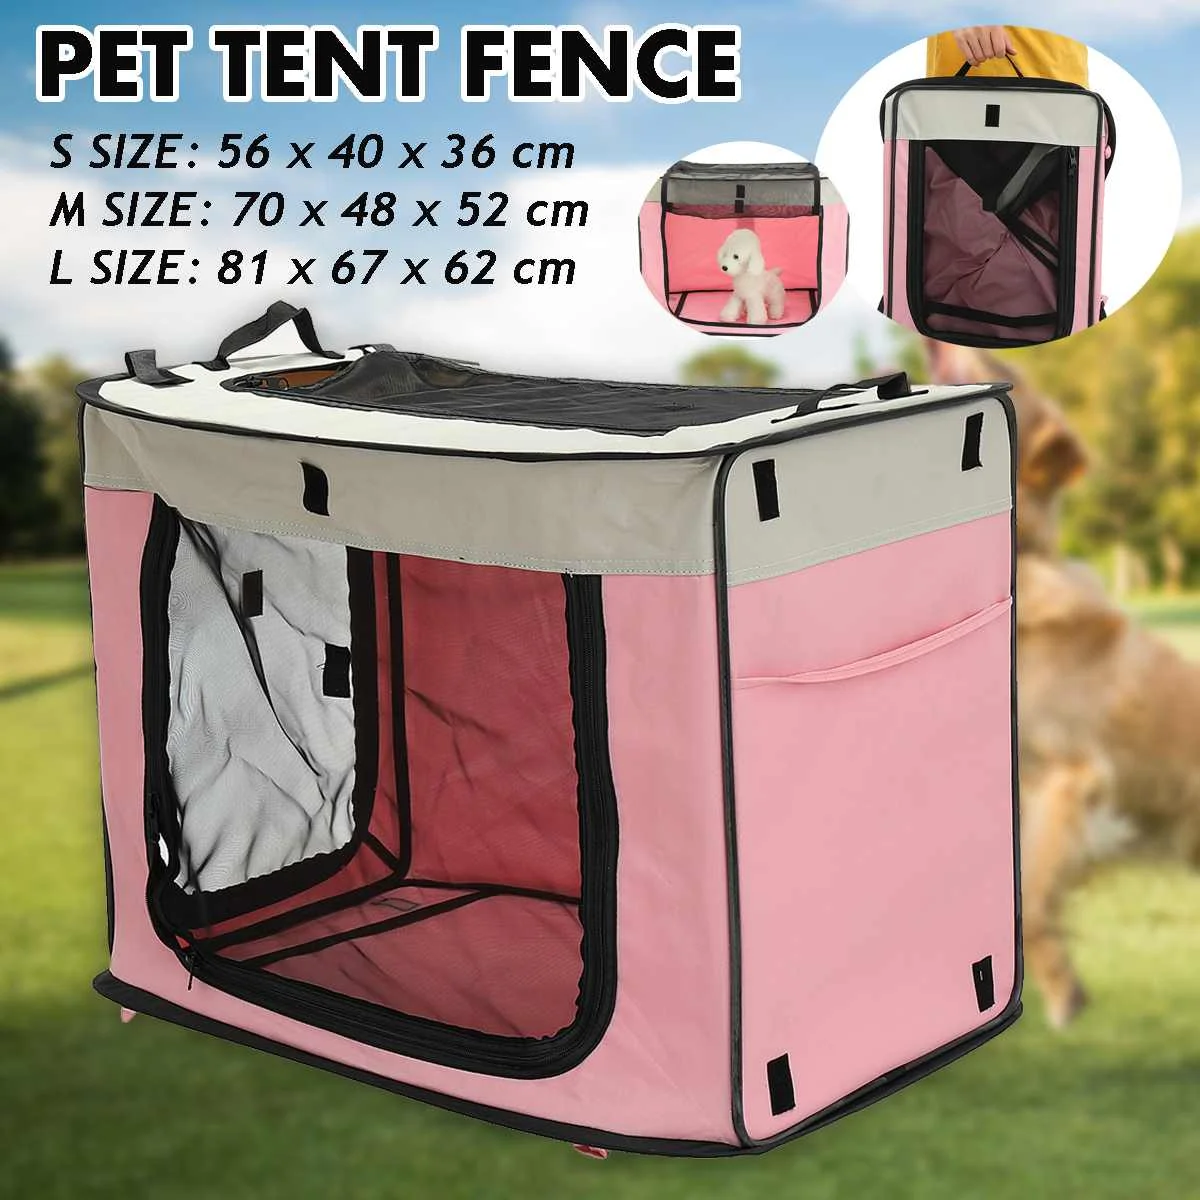 

Portable Folding Rectangular Pet Tent Dog Cage Playpen Fence Puppy Kennel Cat Pet Play Tents Tunnel Breathable Dog House S/M/L